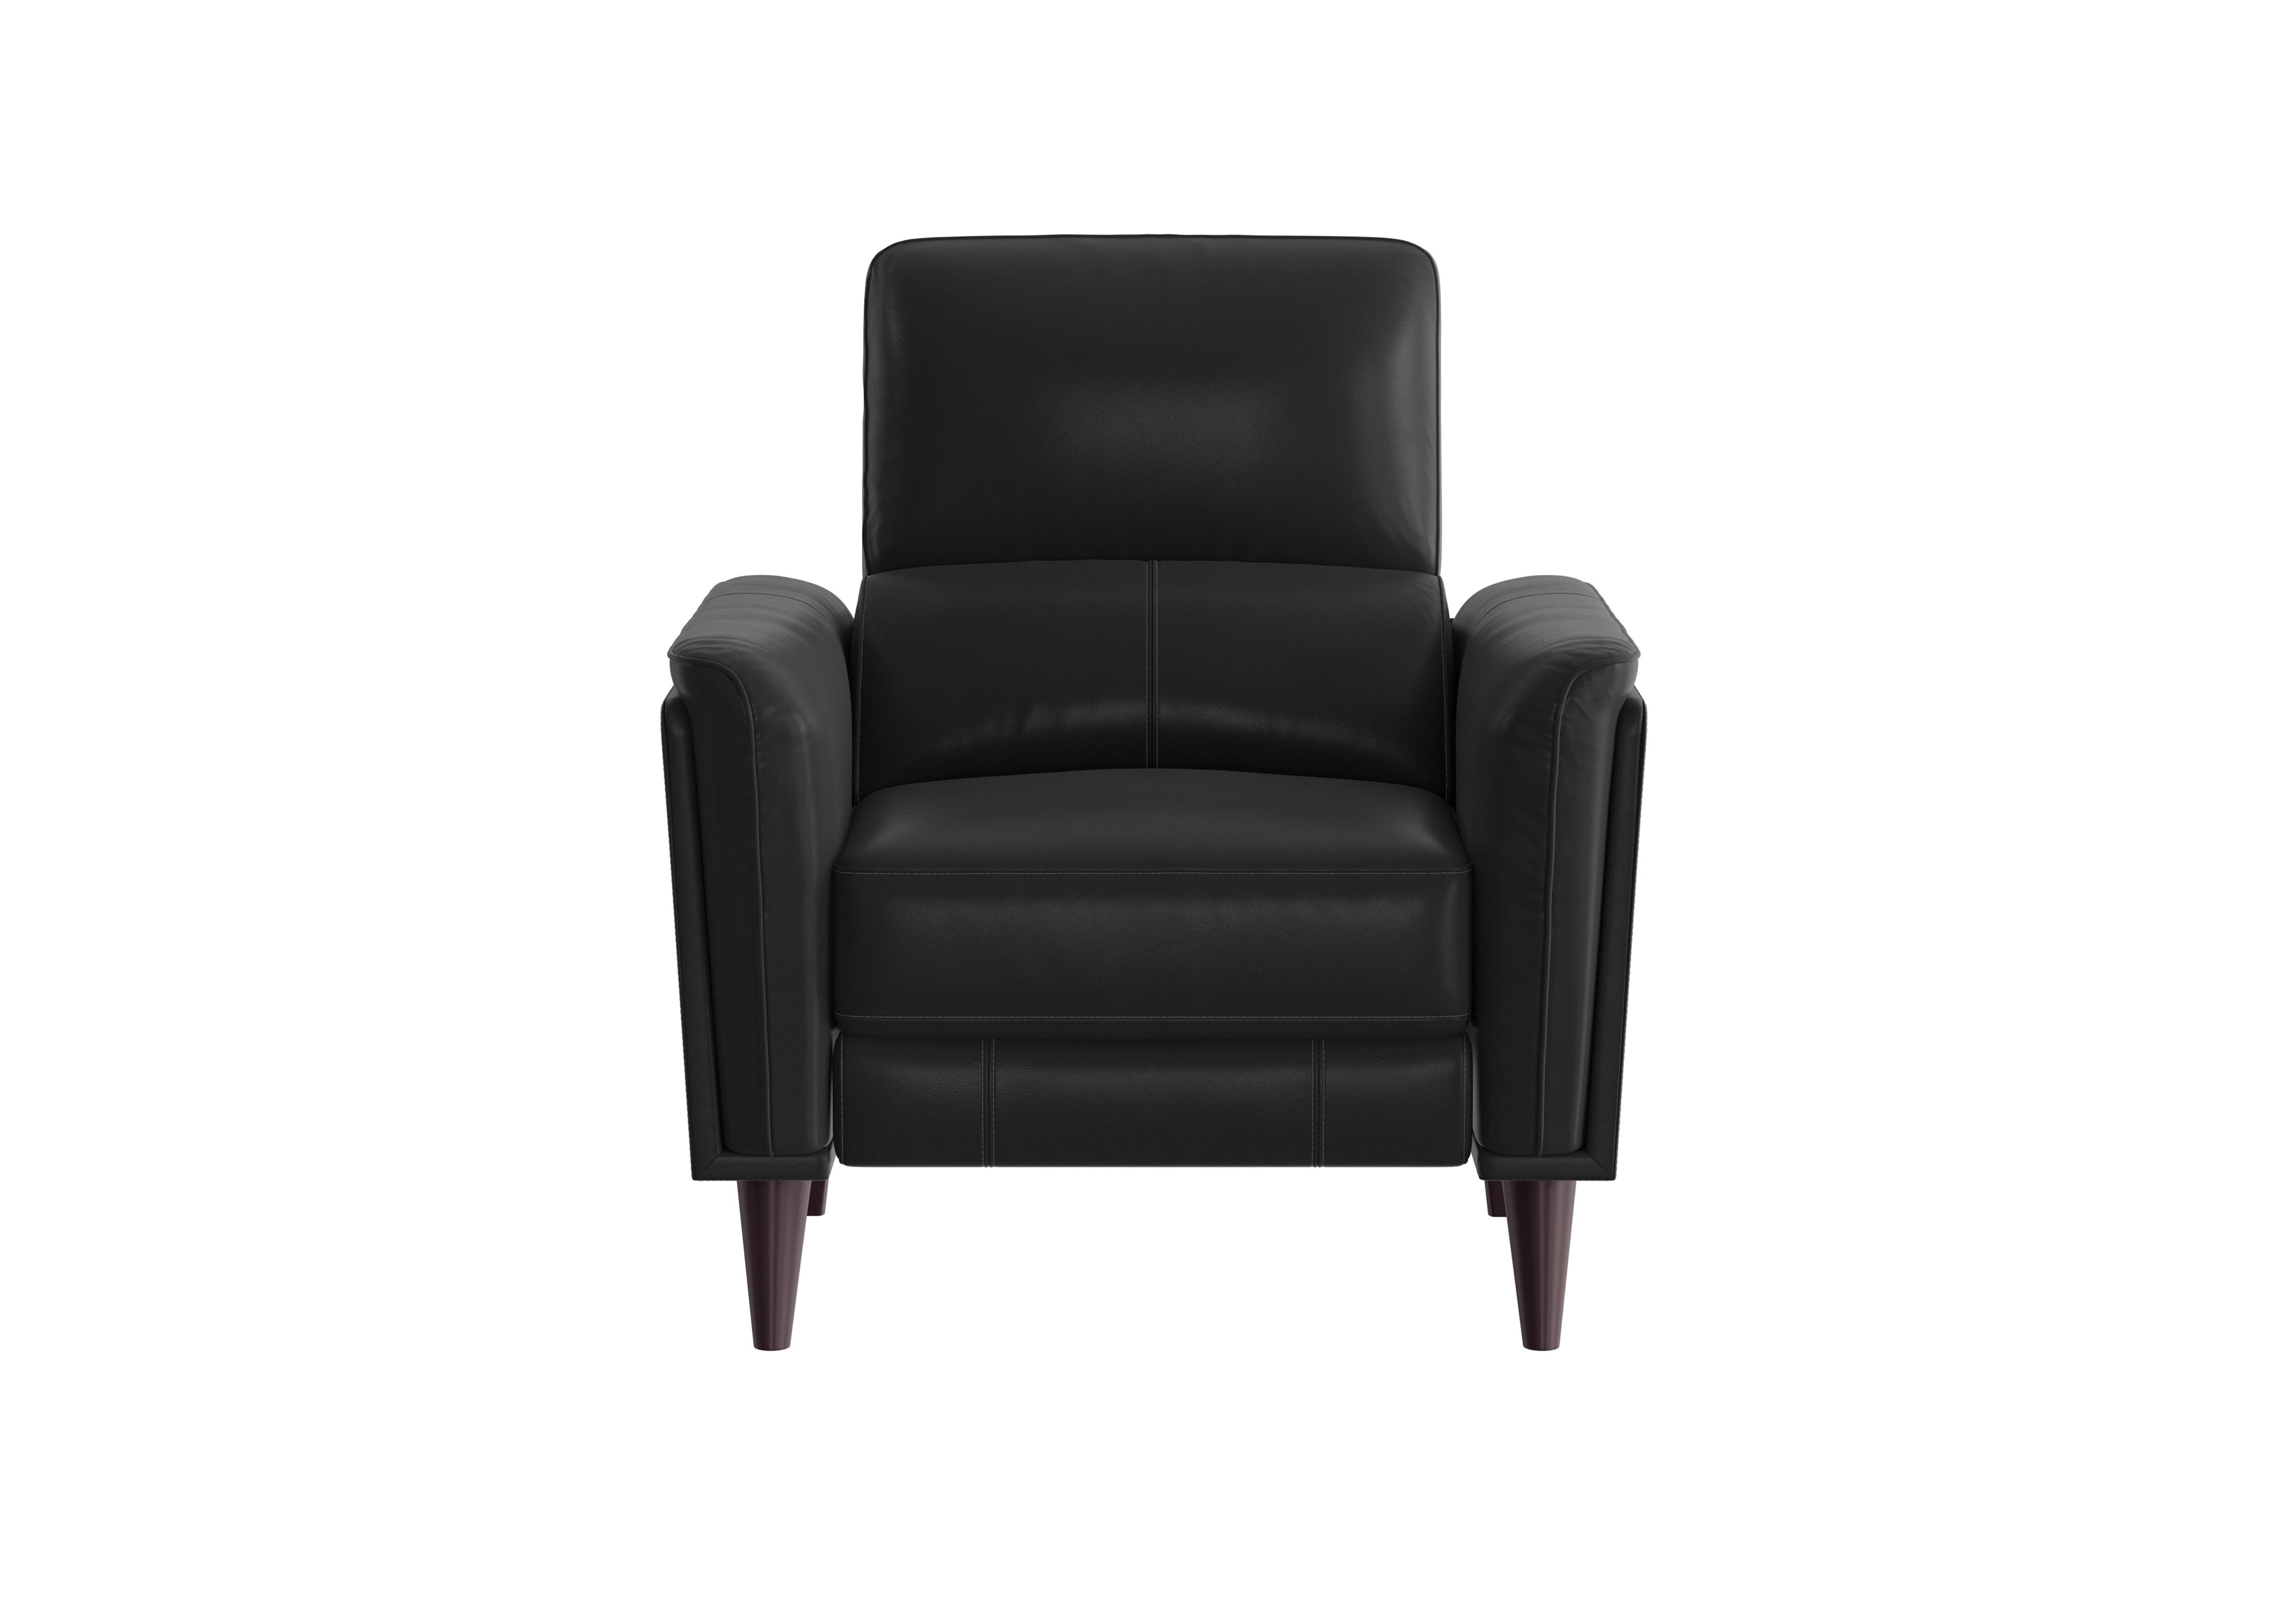 Compact Collection Klein Leather Chair in Bv-3500 Classic Black on Furniture Village